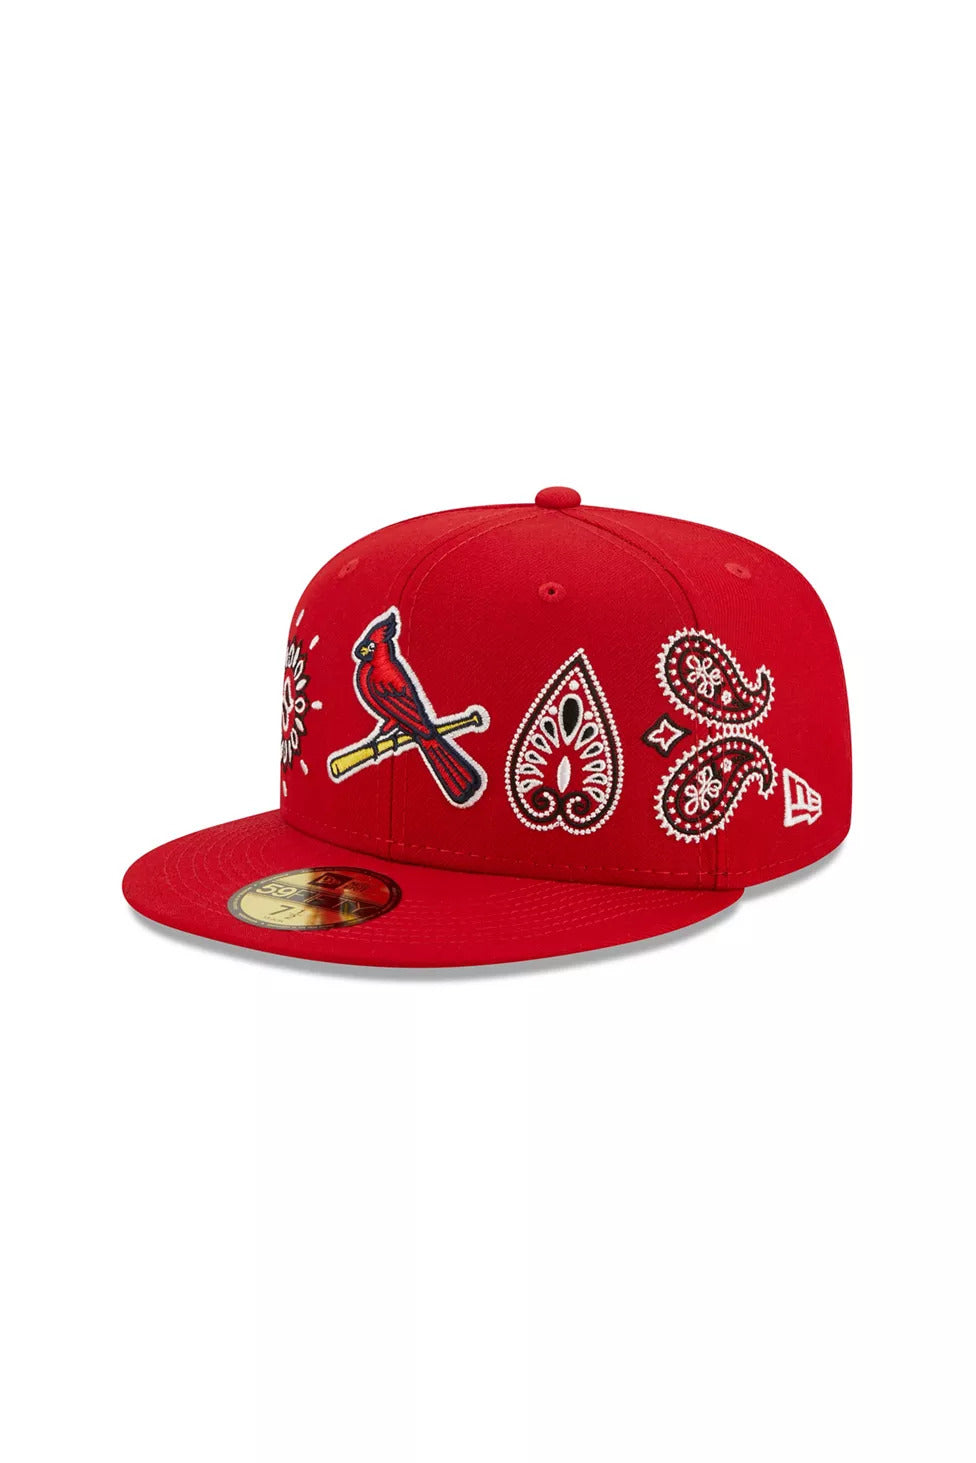 St. Louis Cardinals New Era MLB 59FIFTY 5950 Fitted Cap Hat Red Crown/Visor Team Color “Bird” Logo (Paisley)